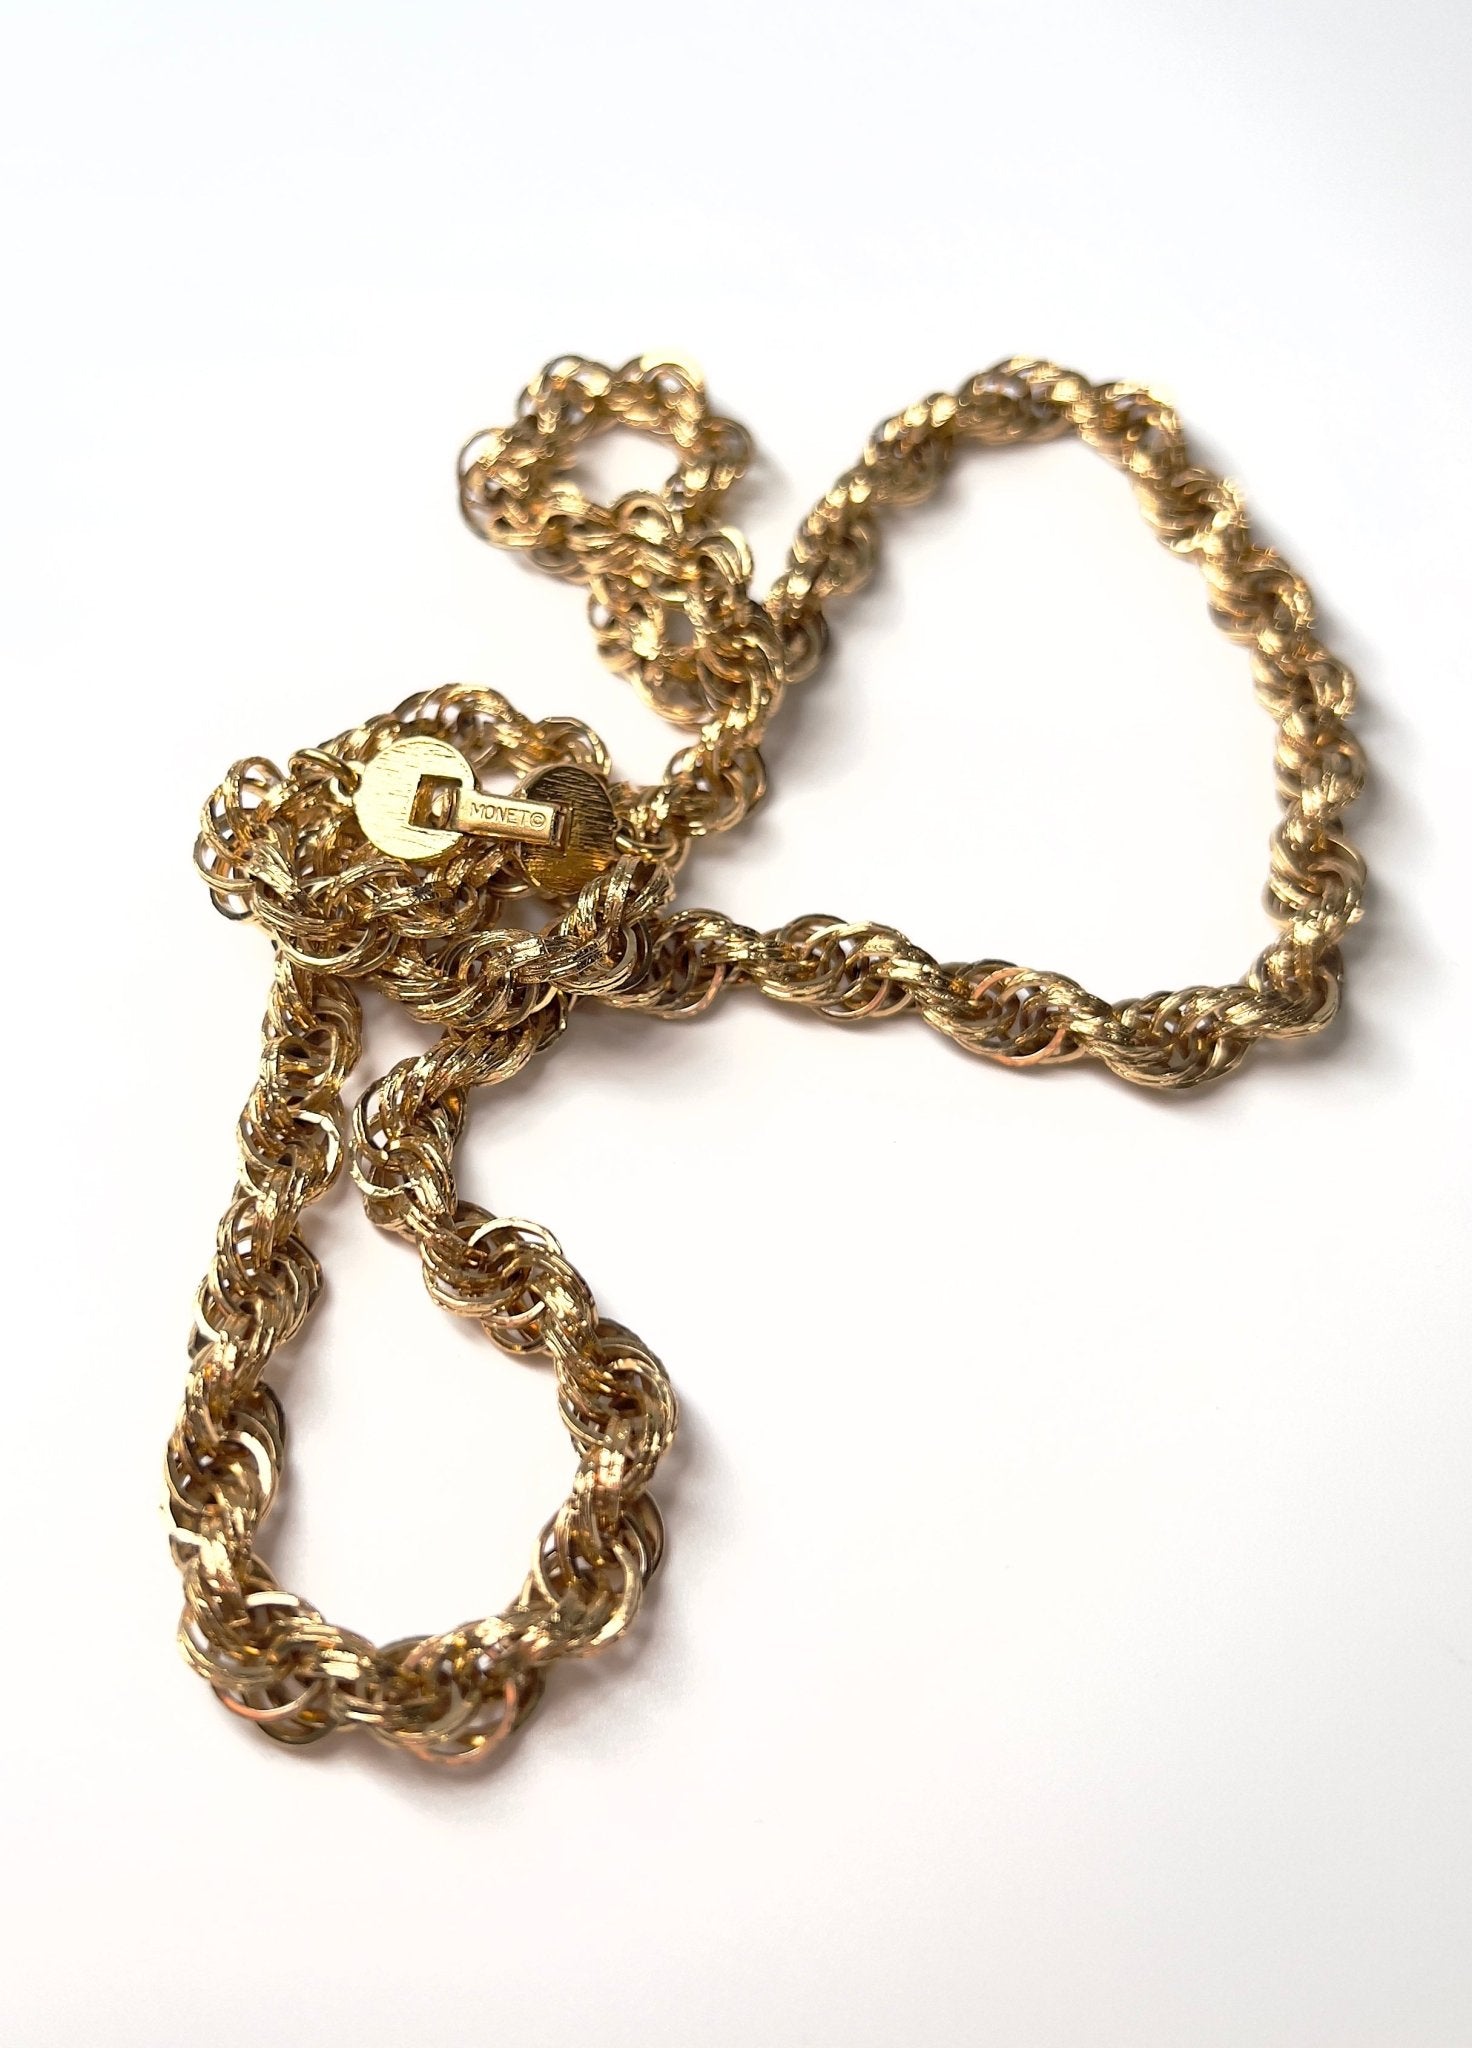 Buy Vintage Monet 16 Gold Tone Chain Necklace 844 Very Thin Chain Online in  India - Etsy